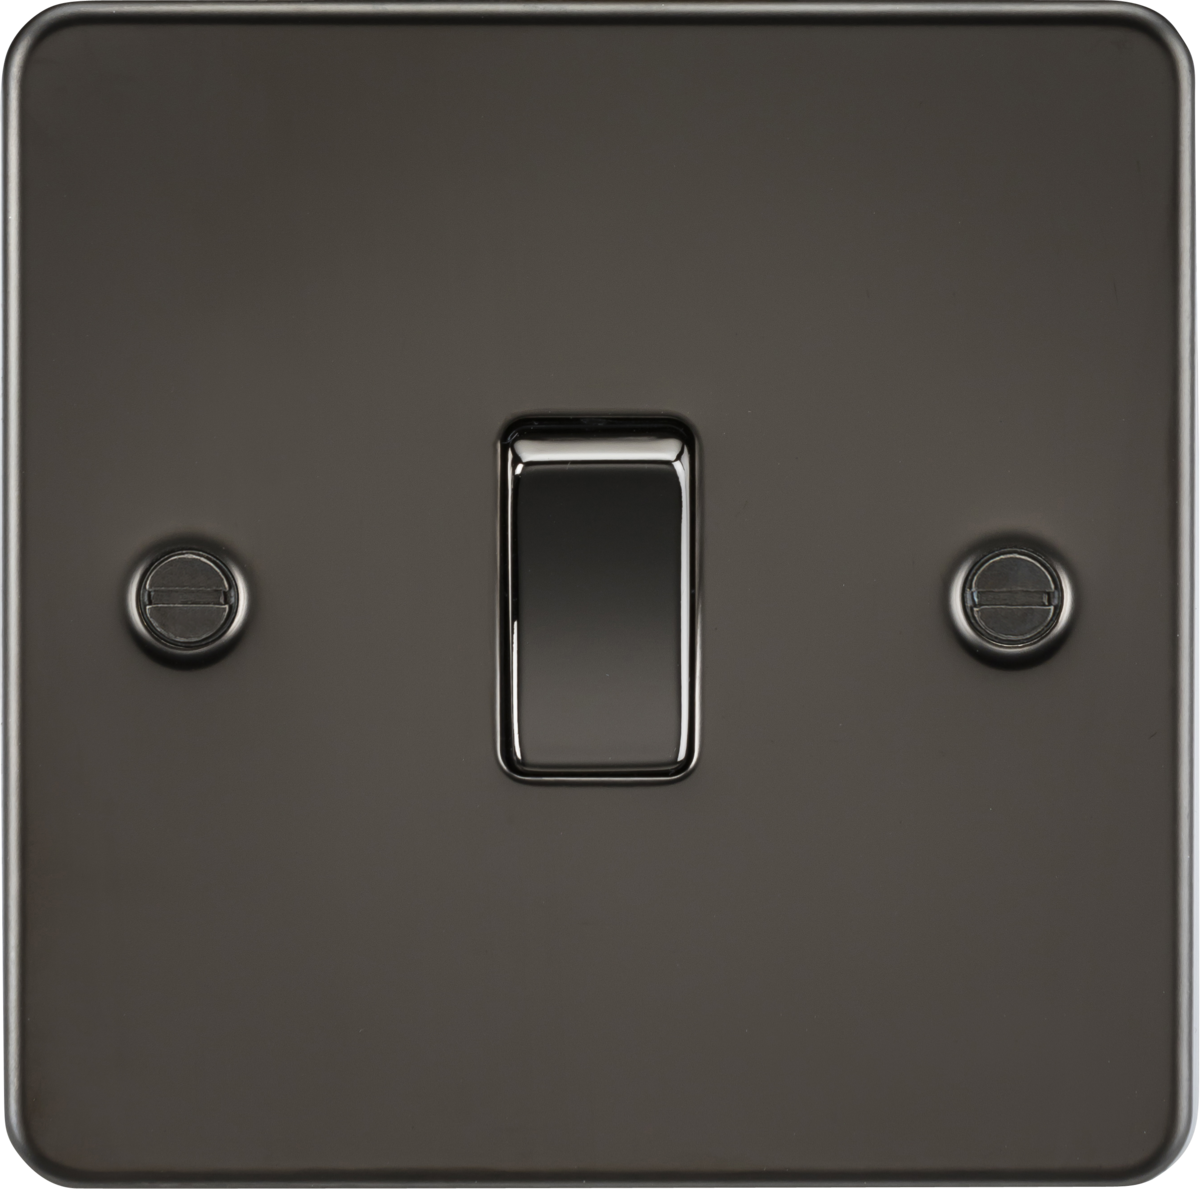 Gunmetal -  Flat Plate Switches and Sockets